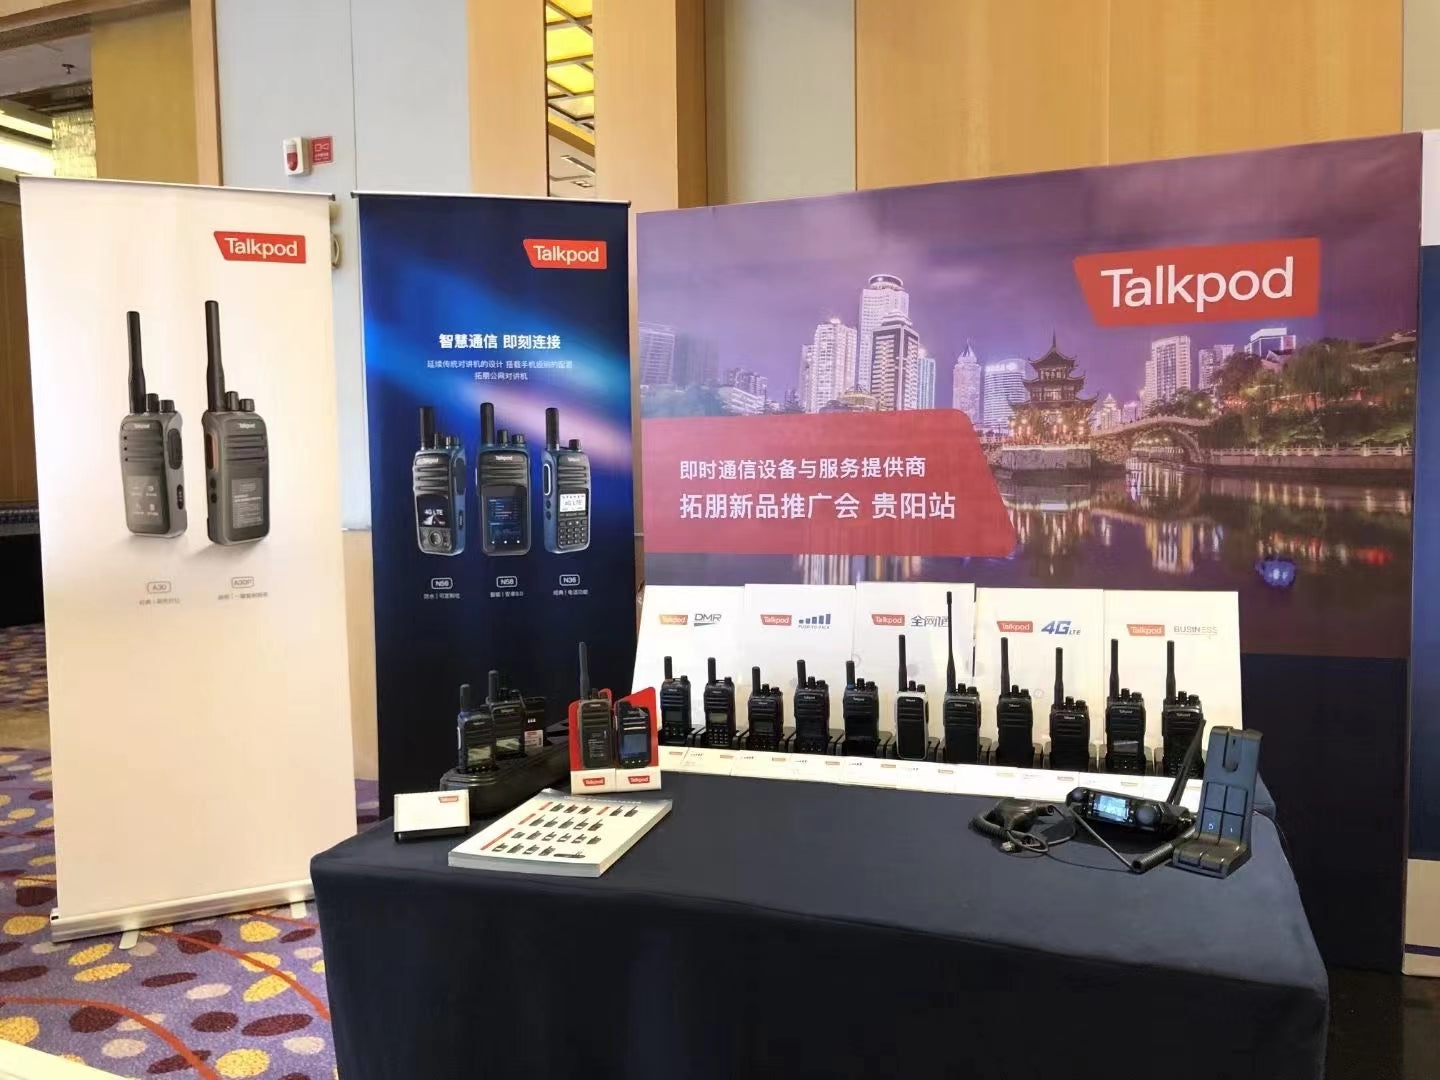 Talkpod Unveils Exciting New Products at the Guizhou Product Launch Event!